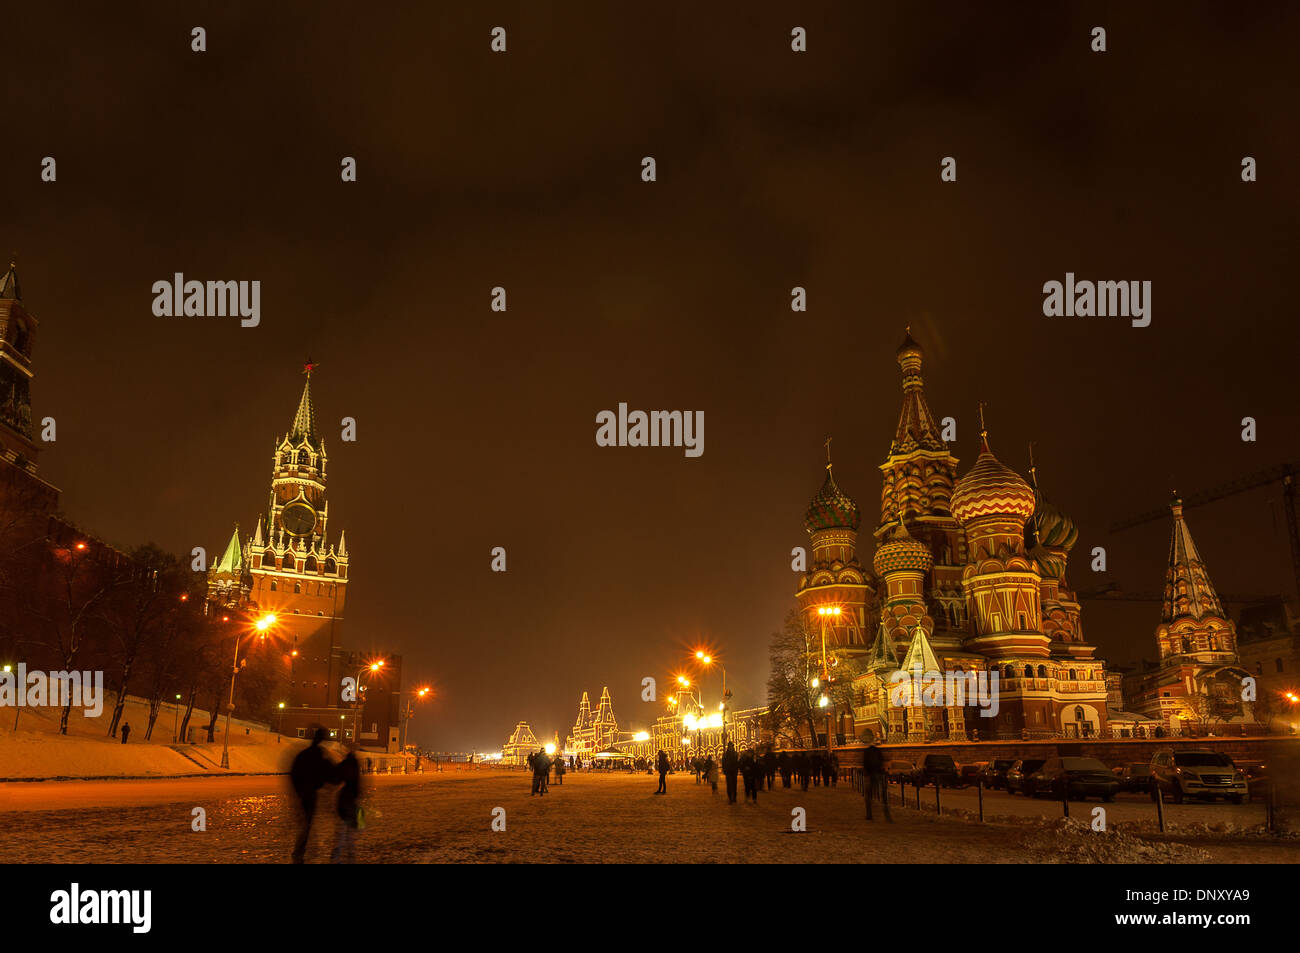 St Basils Cathedral and Spasskaya tower at winter night Stock Photo